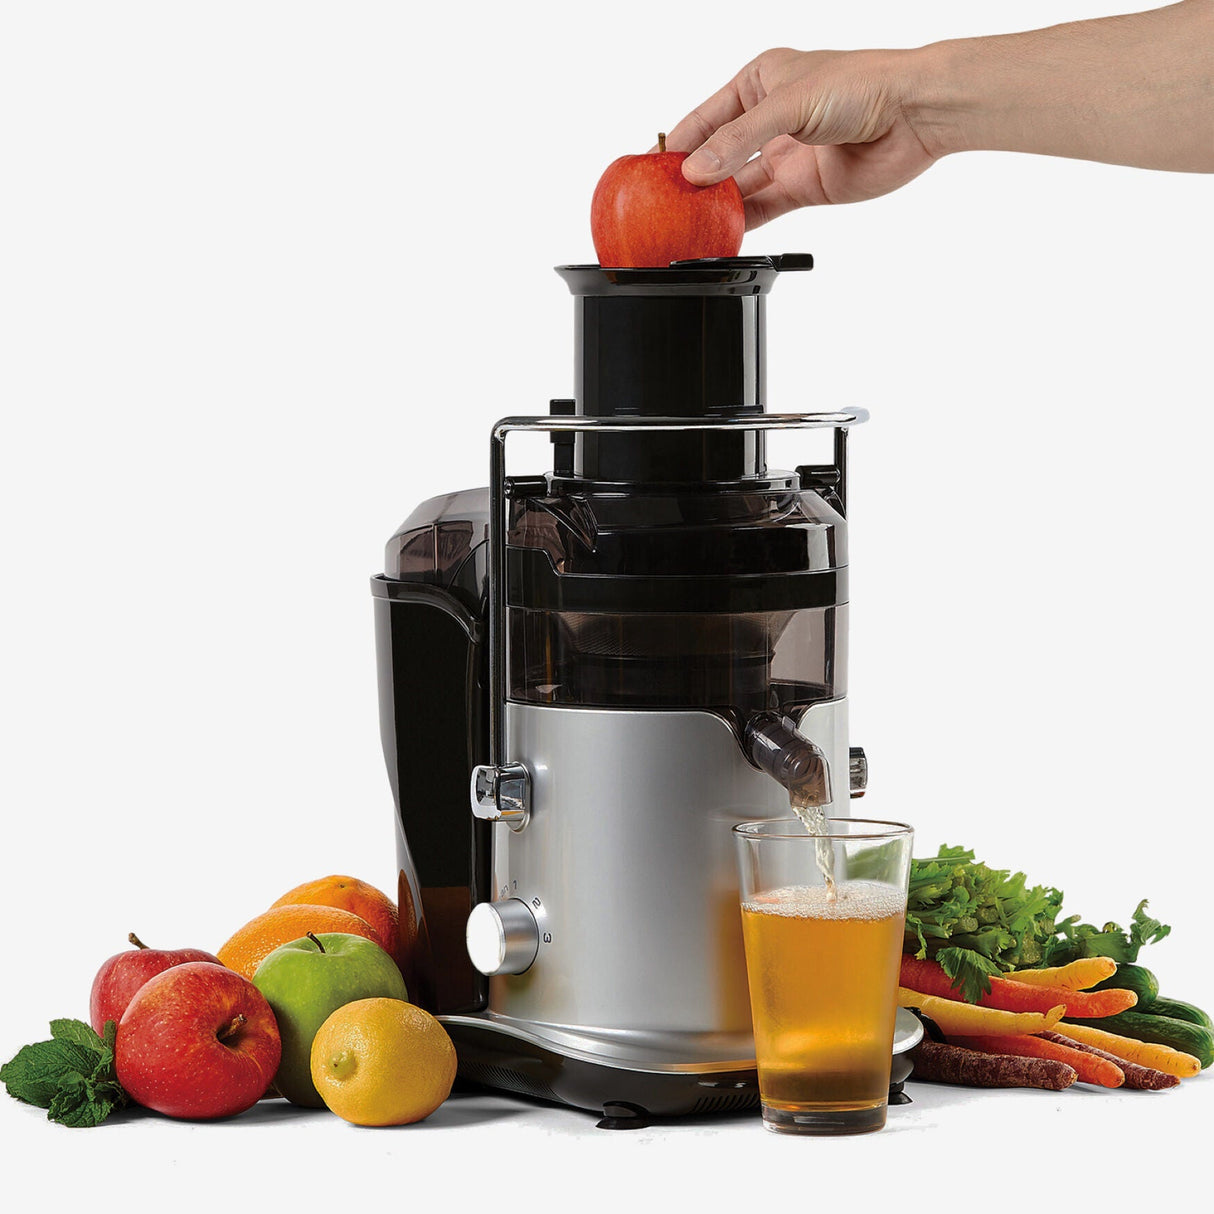 STARLYF SELF CLEANING JUICER